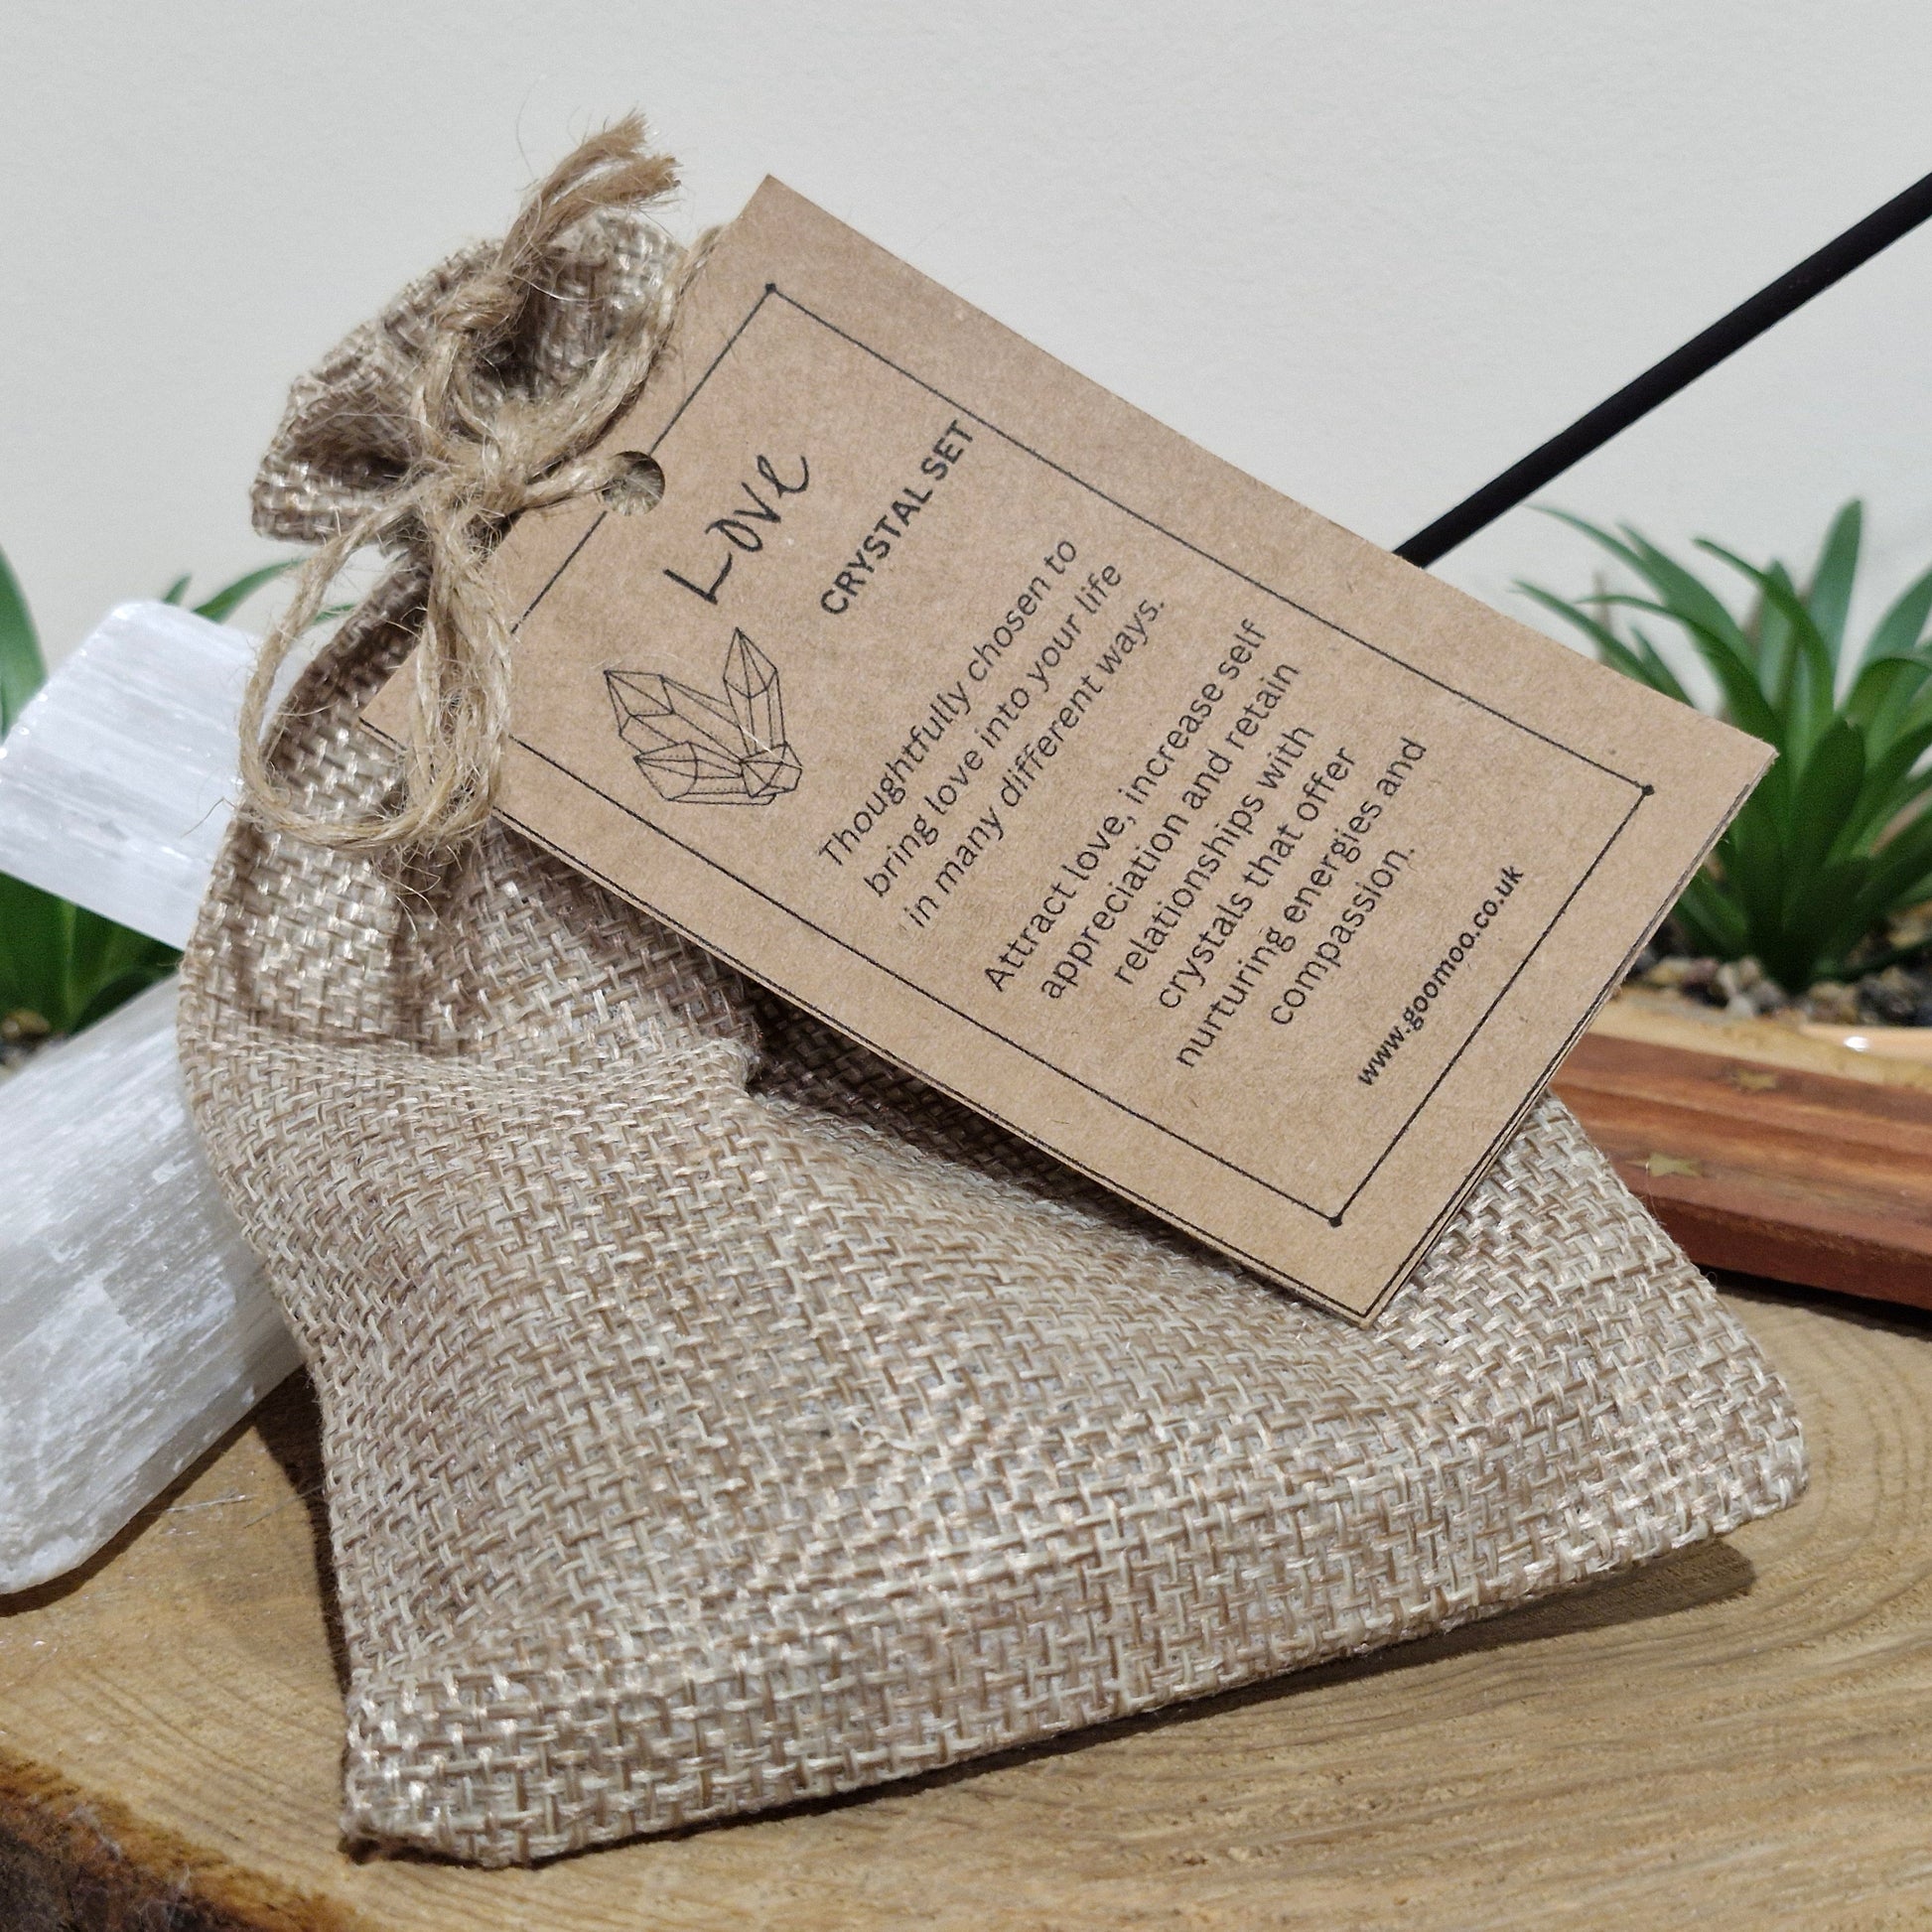 An eco friendly jute string bag containing six specially selected tumblestones. Finished with a kraft card tag explaining the meanings and uses of crystal contents